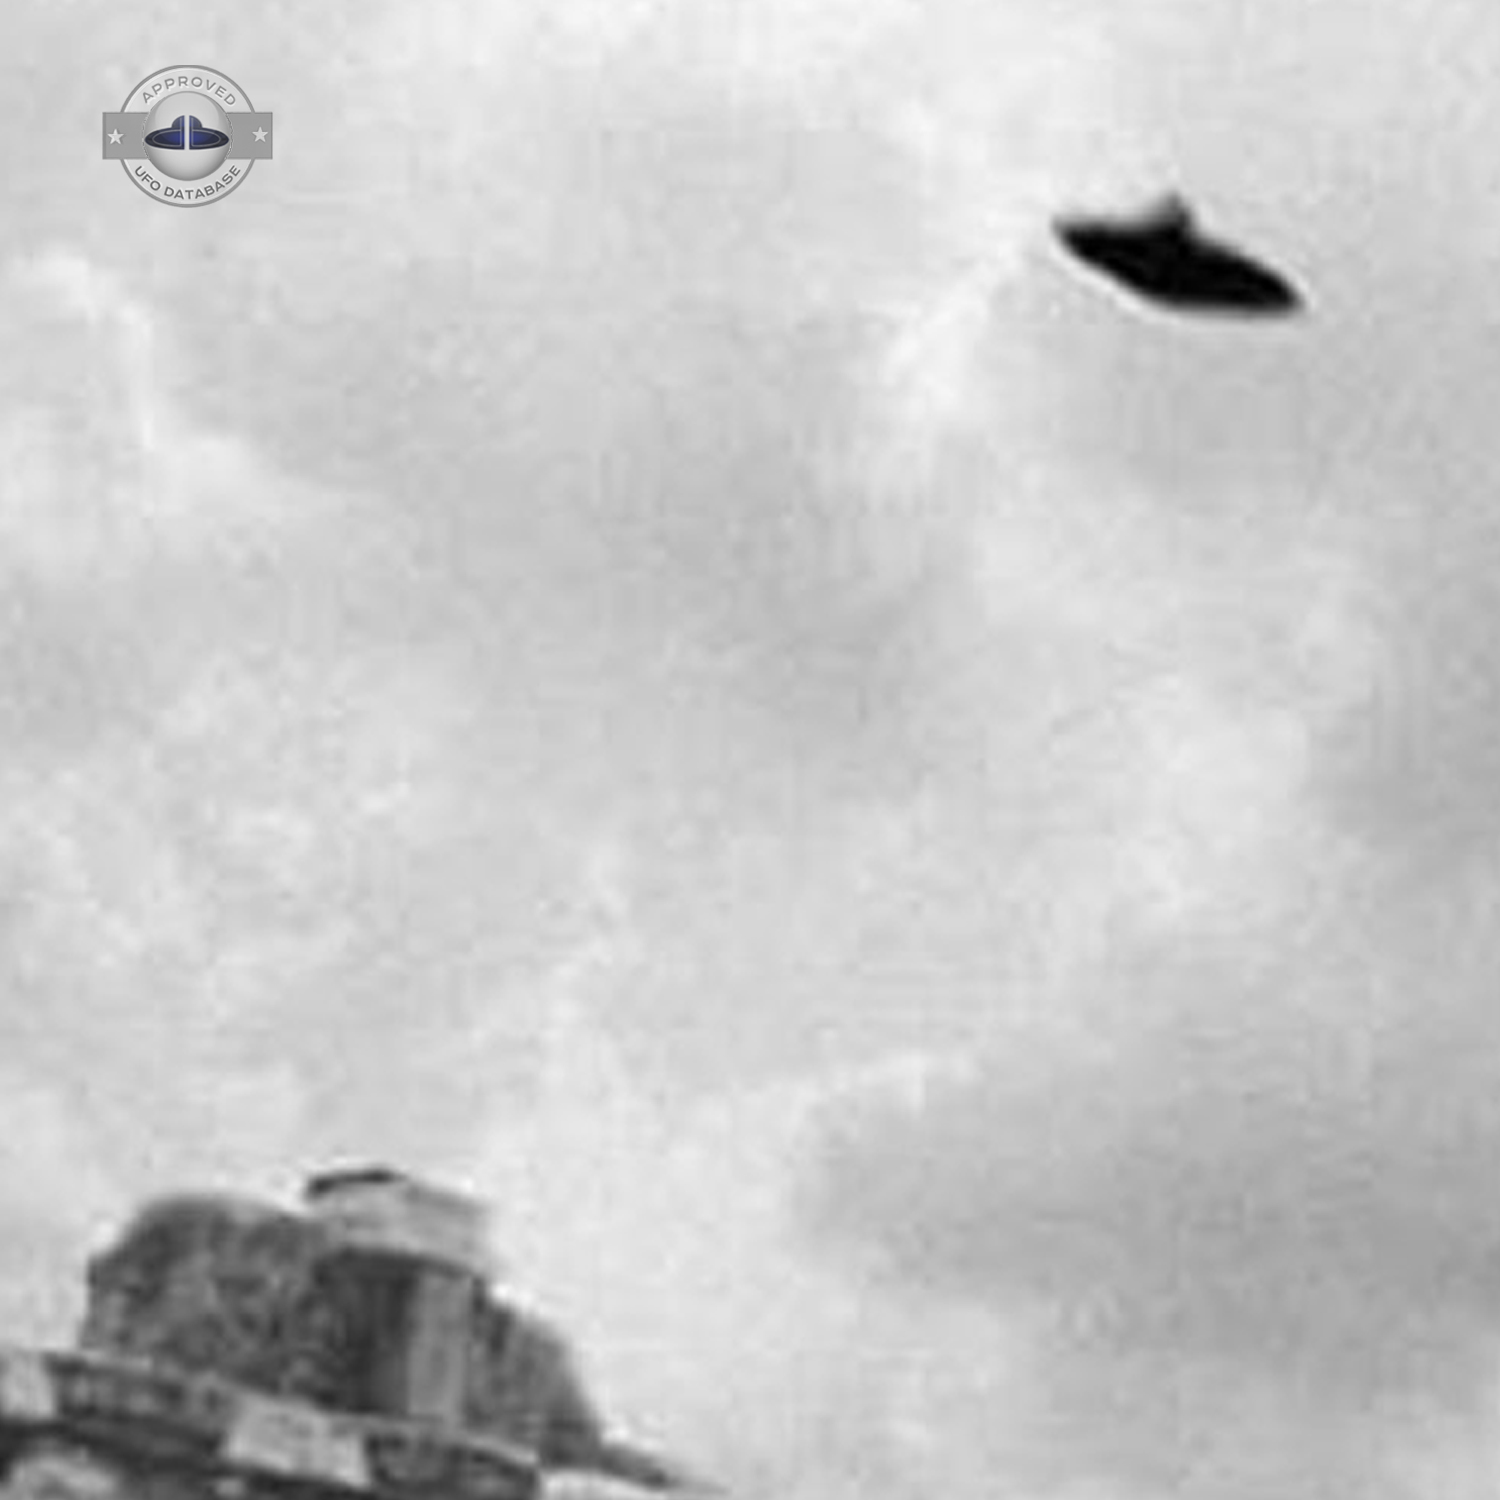 flying saucer passing over the ancient ruins near the center of Rome UFO Picture #51-3